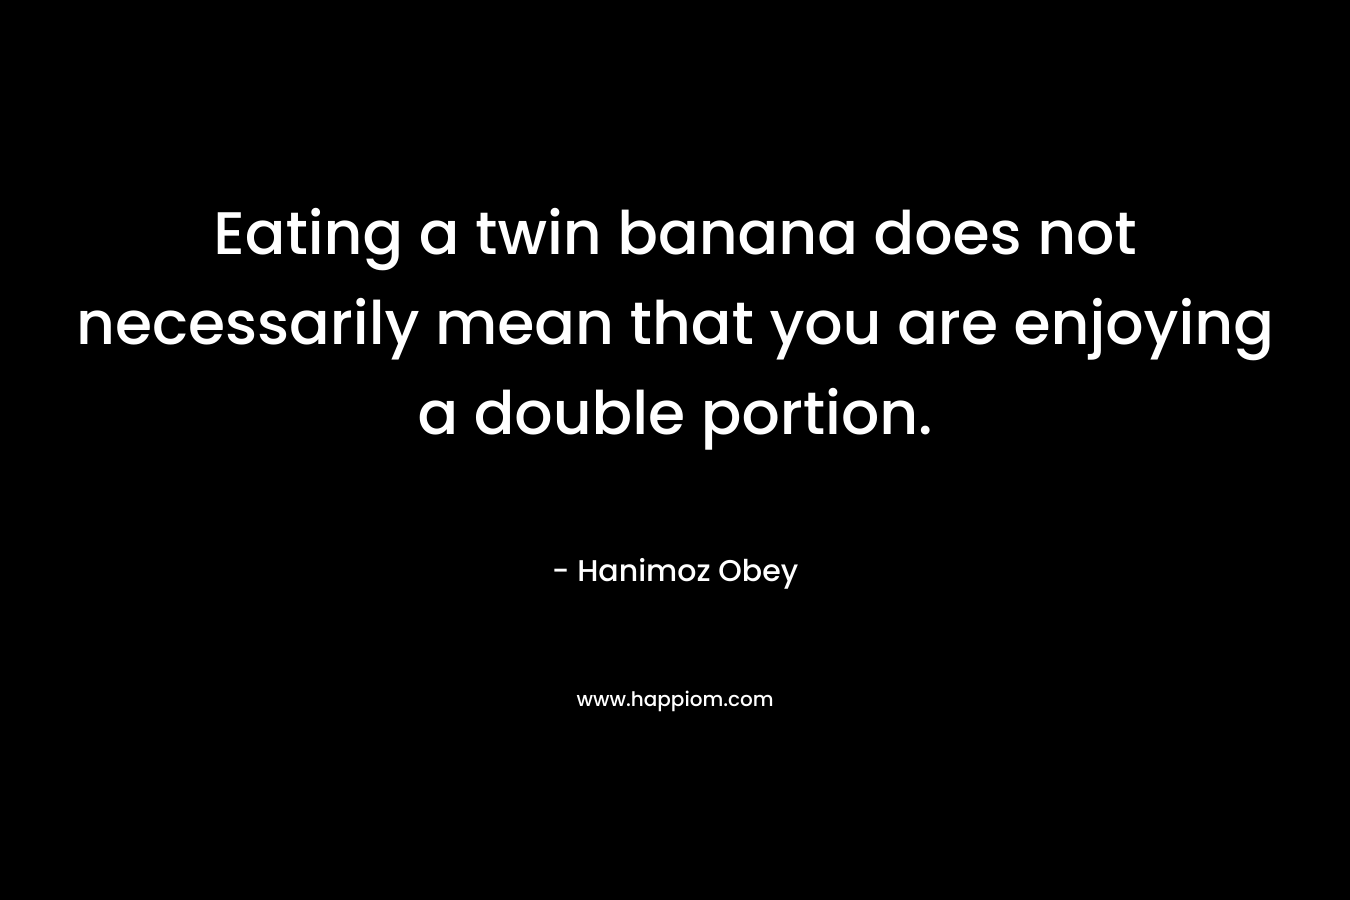 Eating a twin banana does not necessarily mean that you are enjoying a double portion.